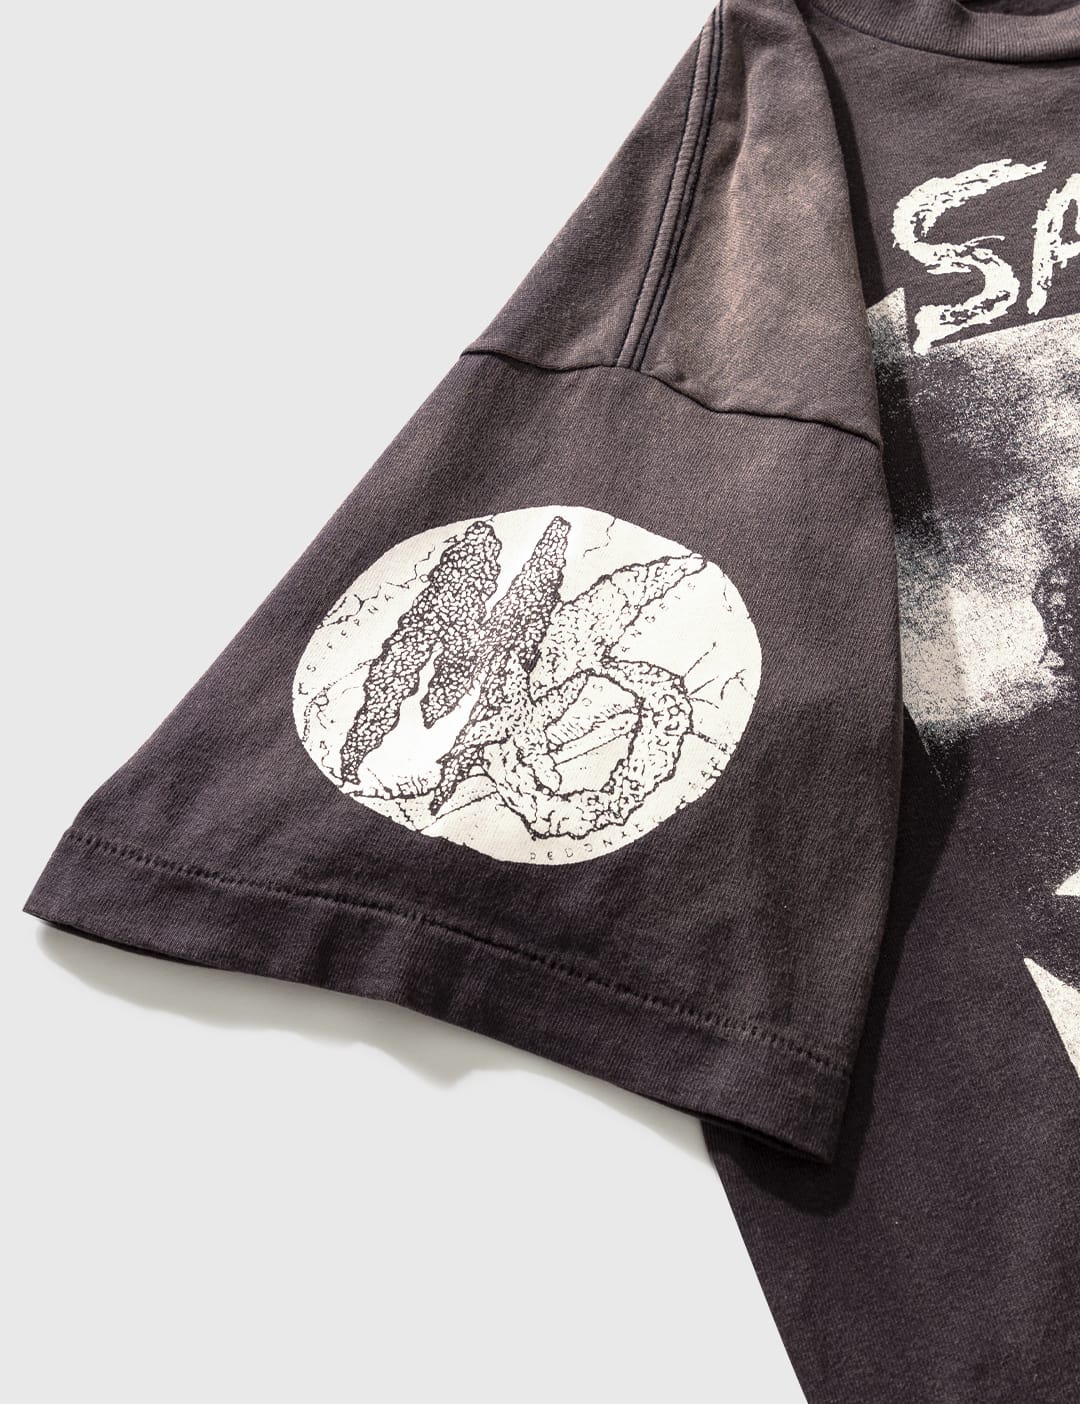 Saint Michael - MX6 T-shirt | HBX - Globally Curated Fashion and